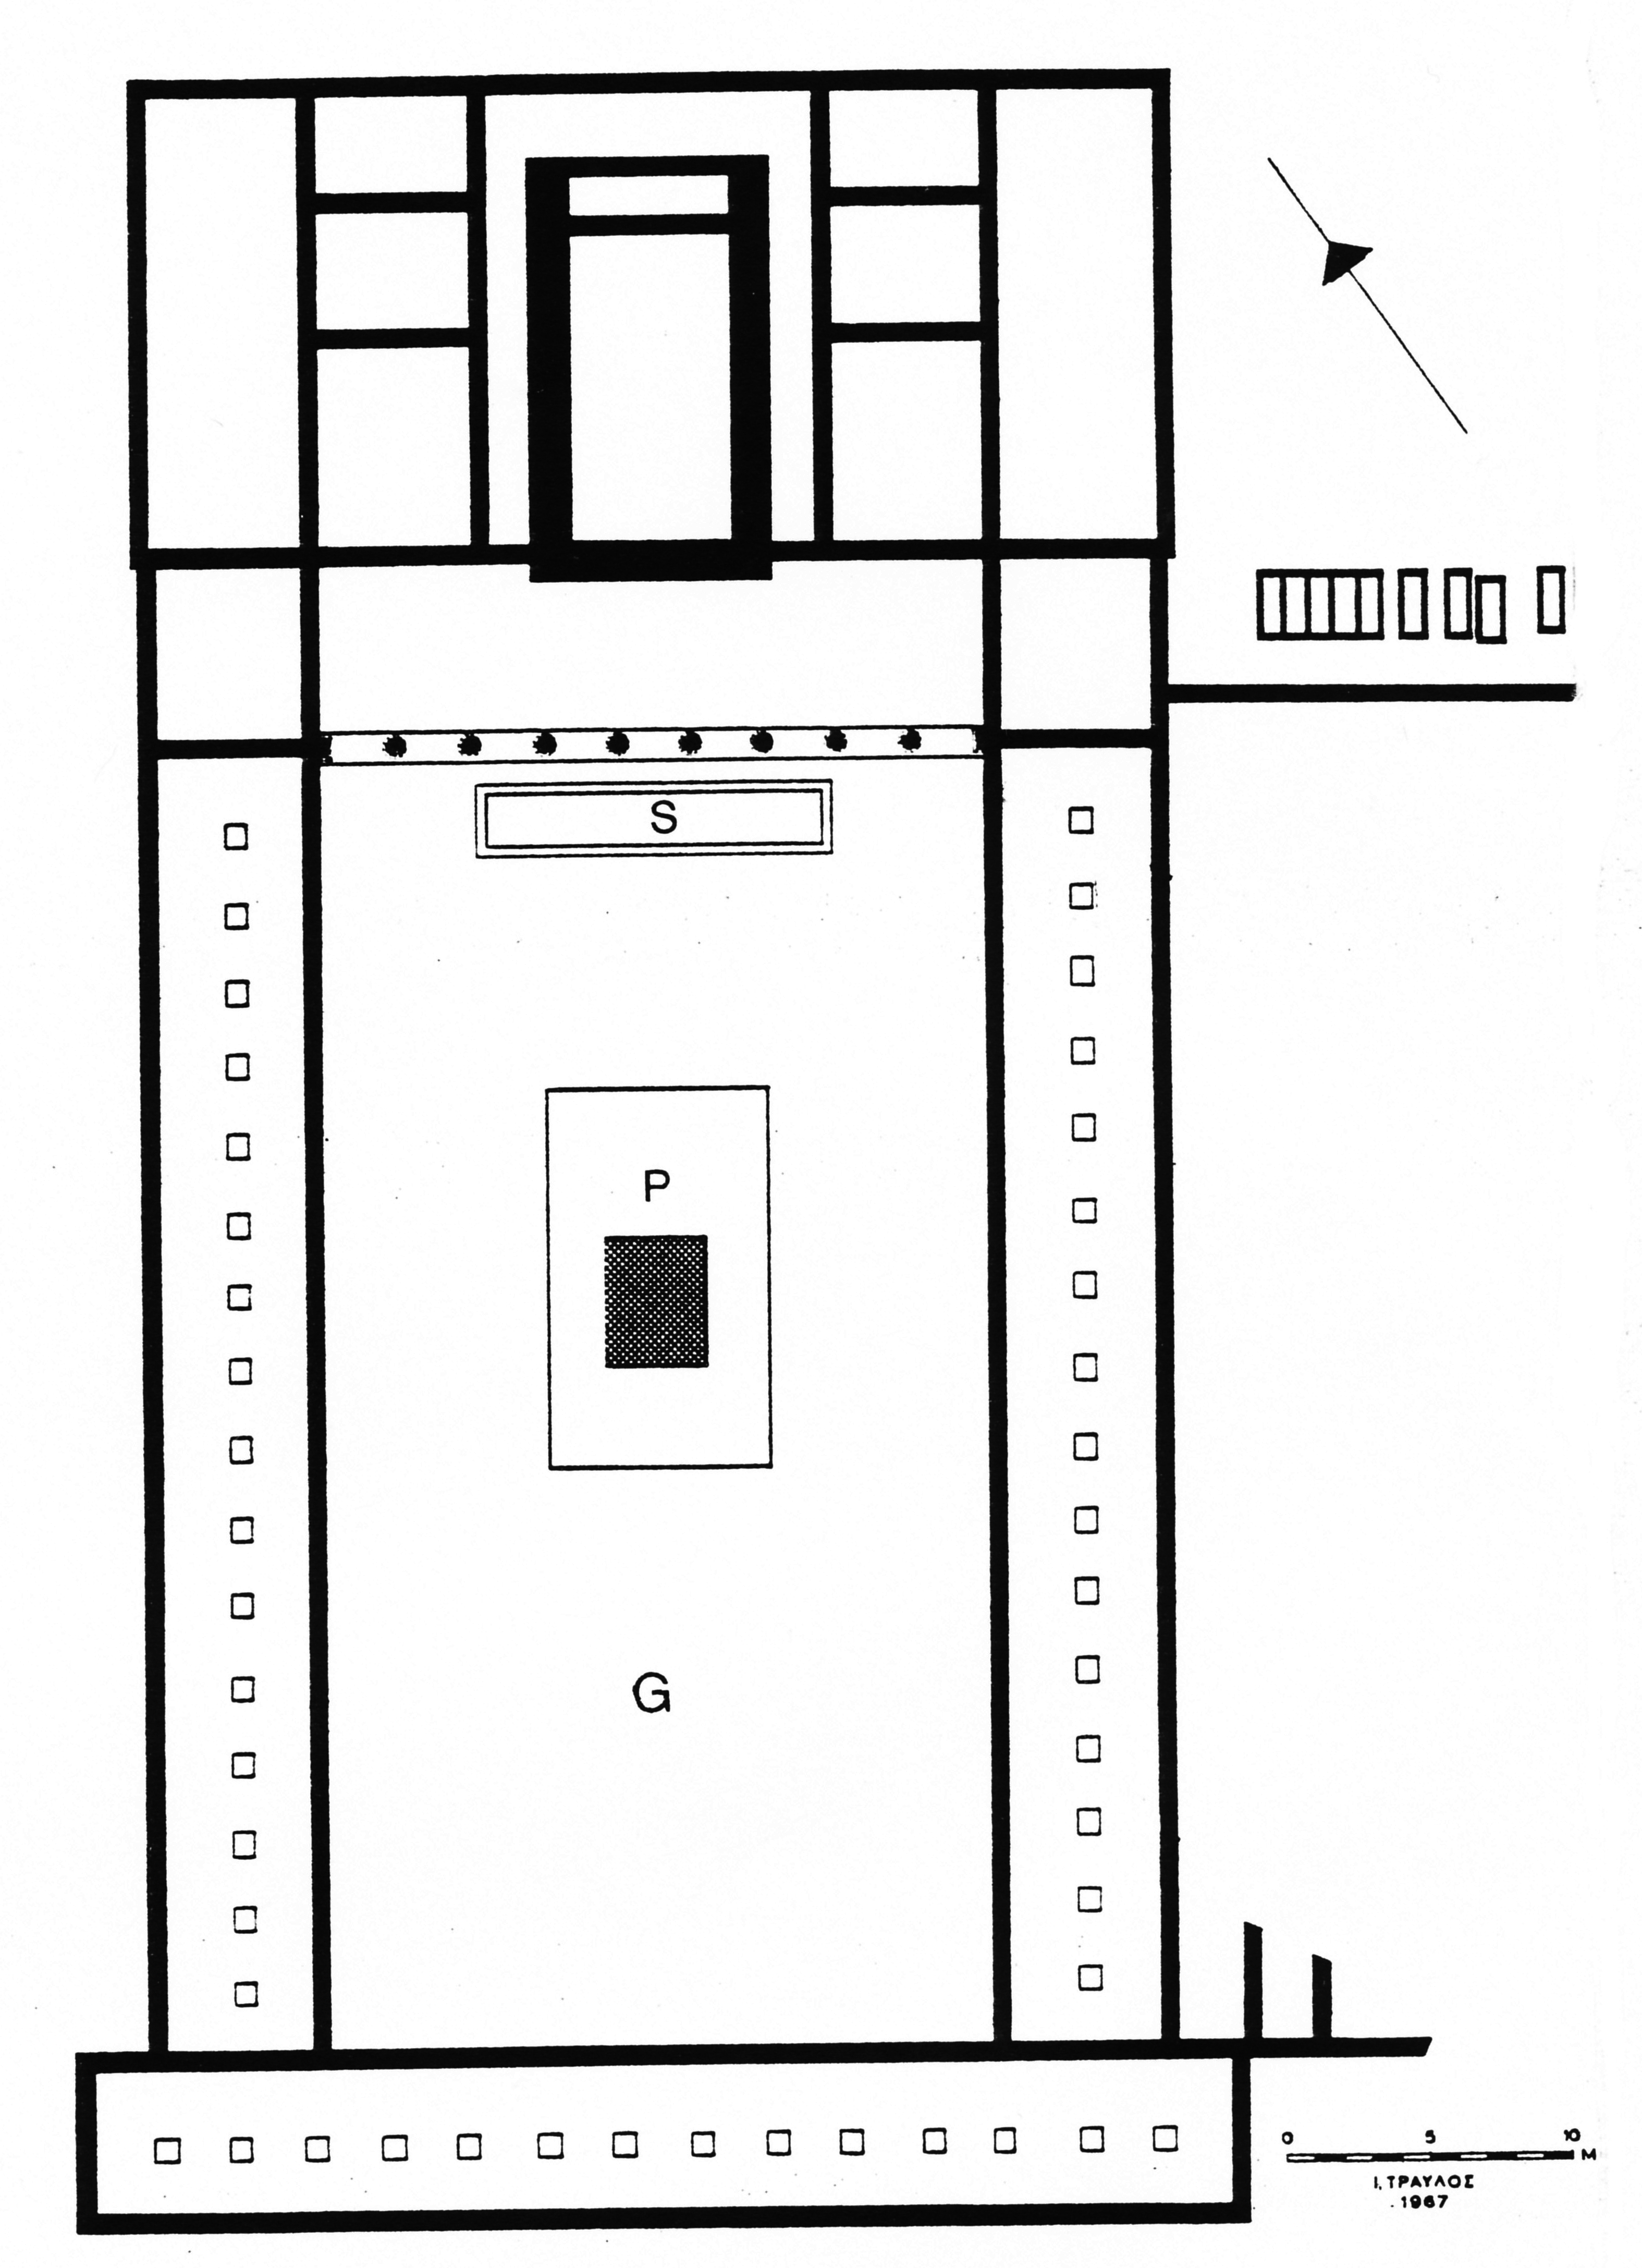 Plan of the late Hellenistic/early Roman gymnasium in the suburb of Academy at Athens